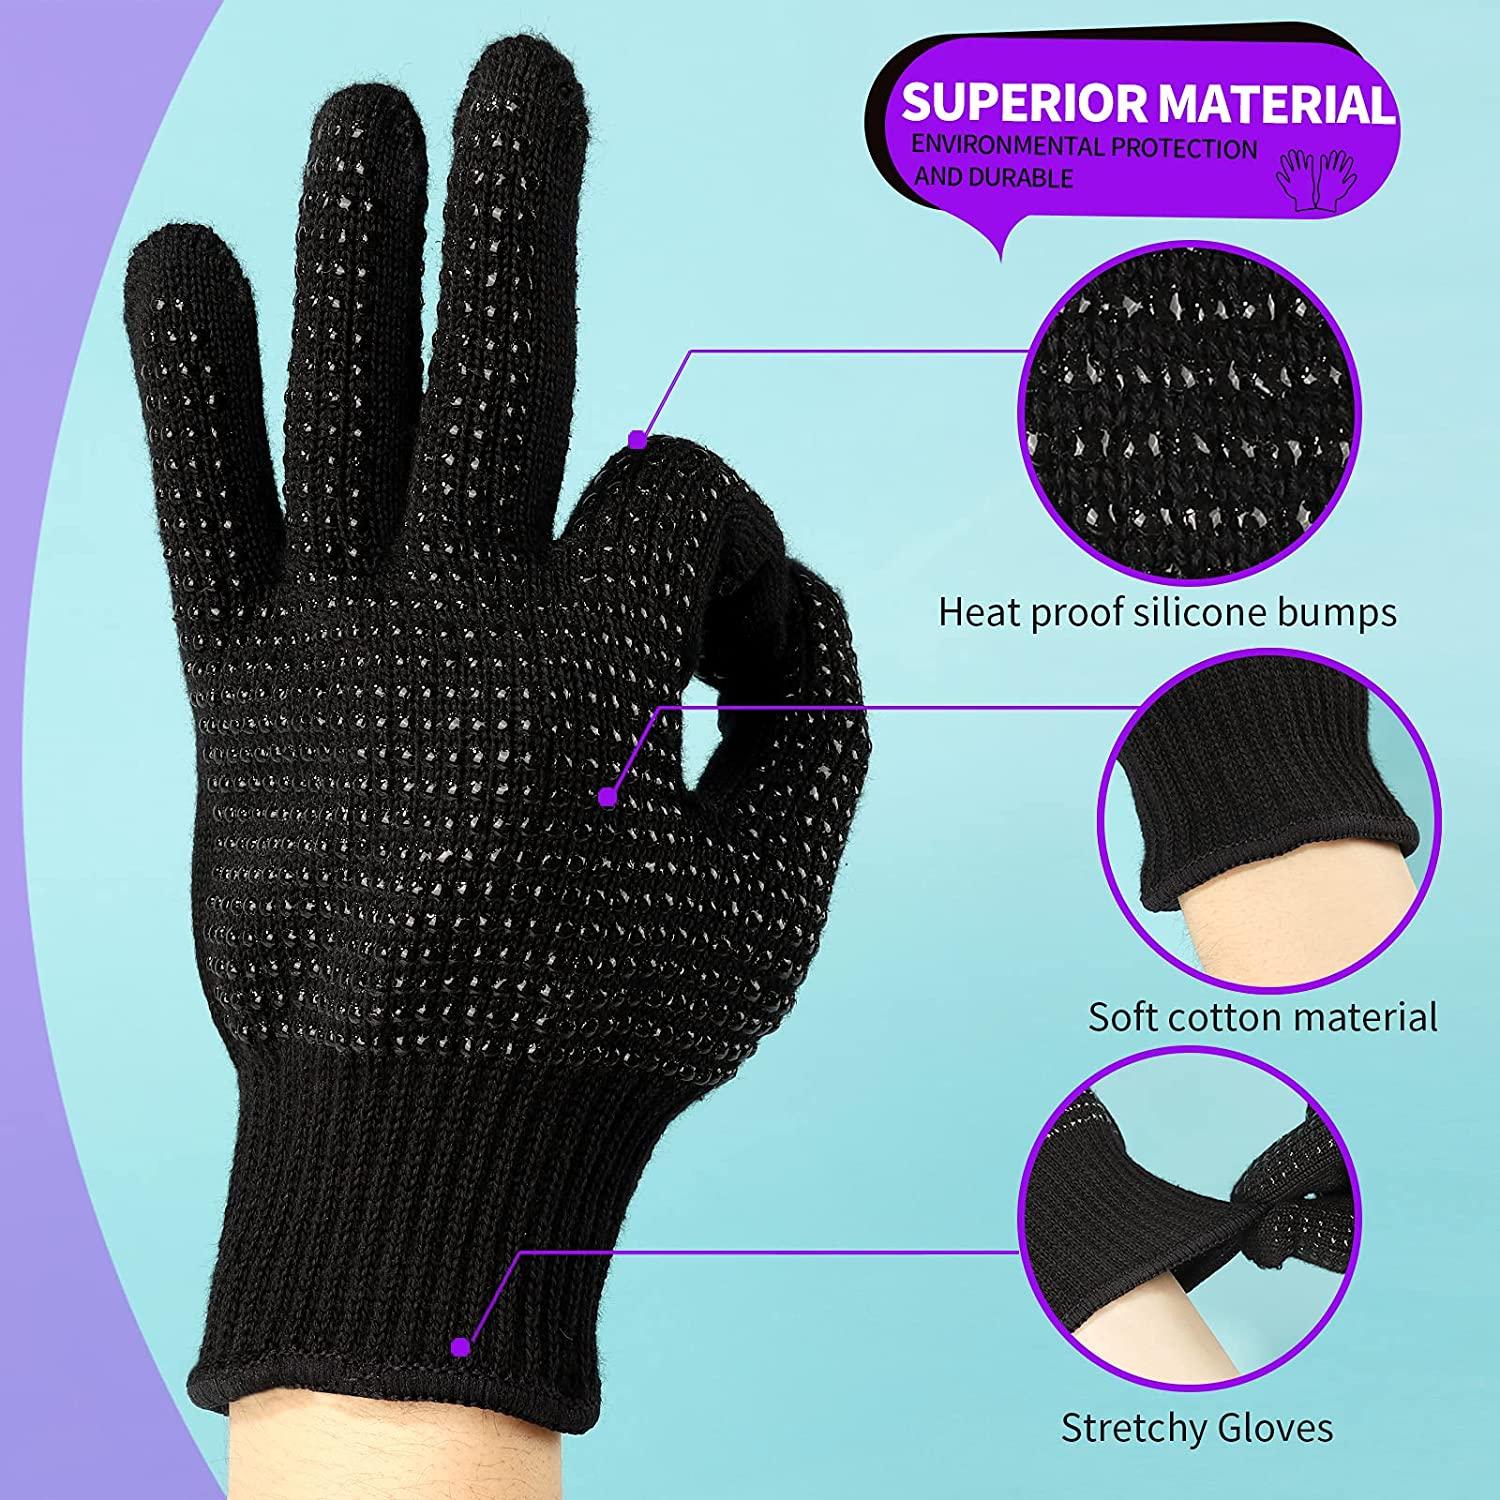 Heat Resistant Glove With Silicone Bumps For Hair Iron Tool, New Upgraded  Professional Heat Glove Mitts For Hot Hair Styling Curling Iron Wand Flat